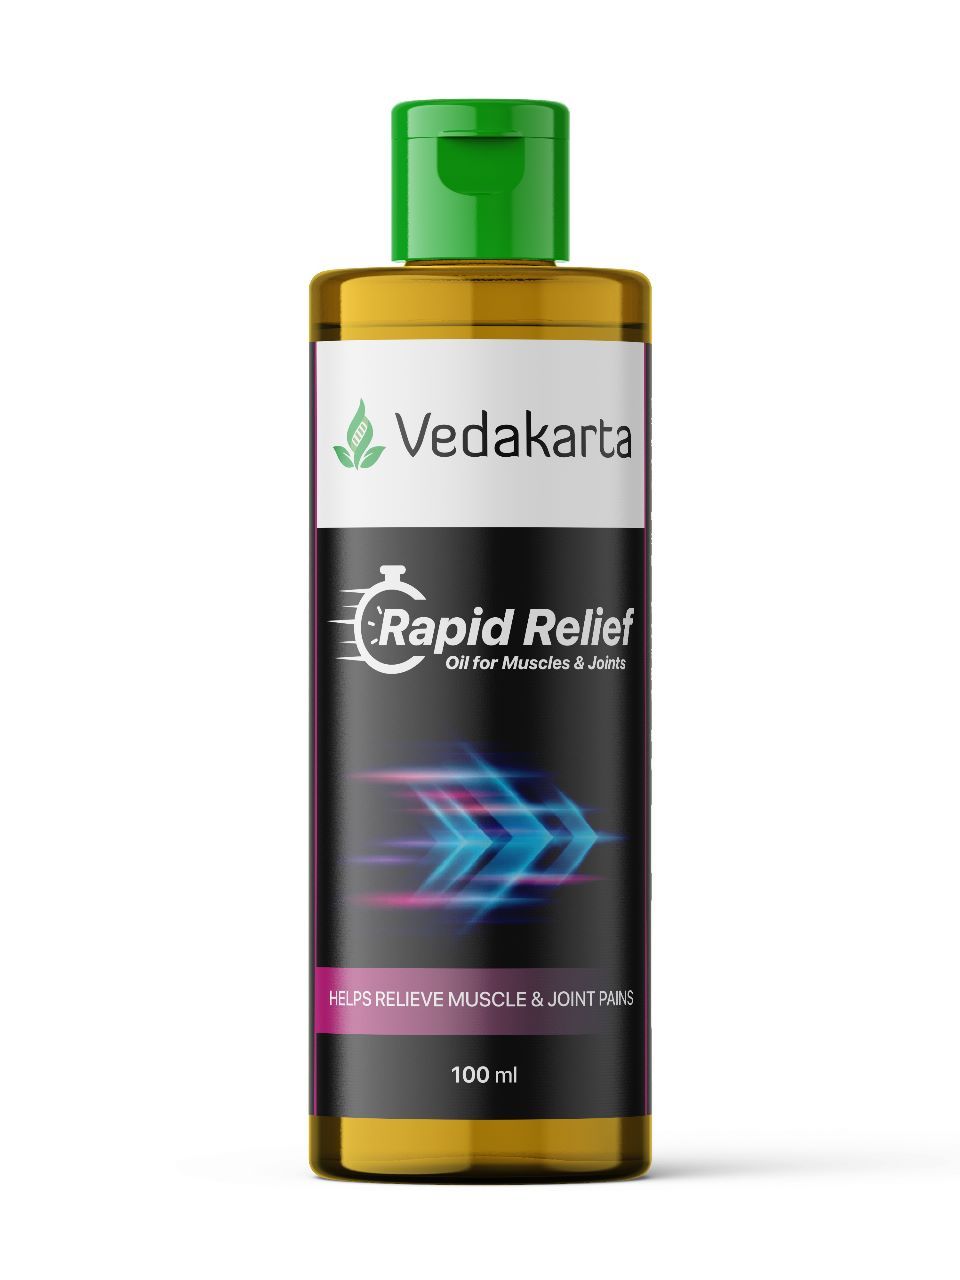 RAPID RELIEF OIL for Muscles & Joints